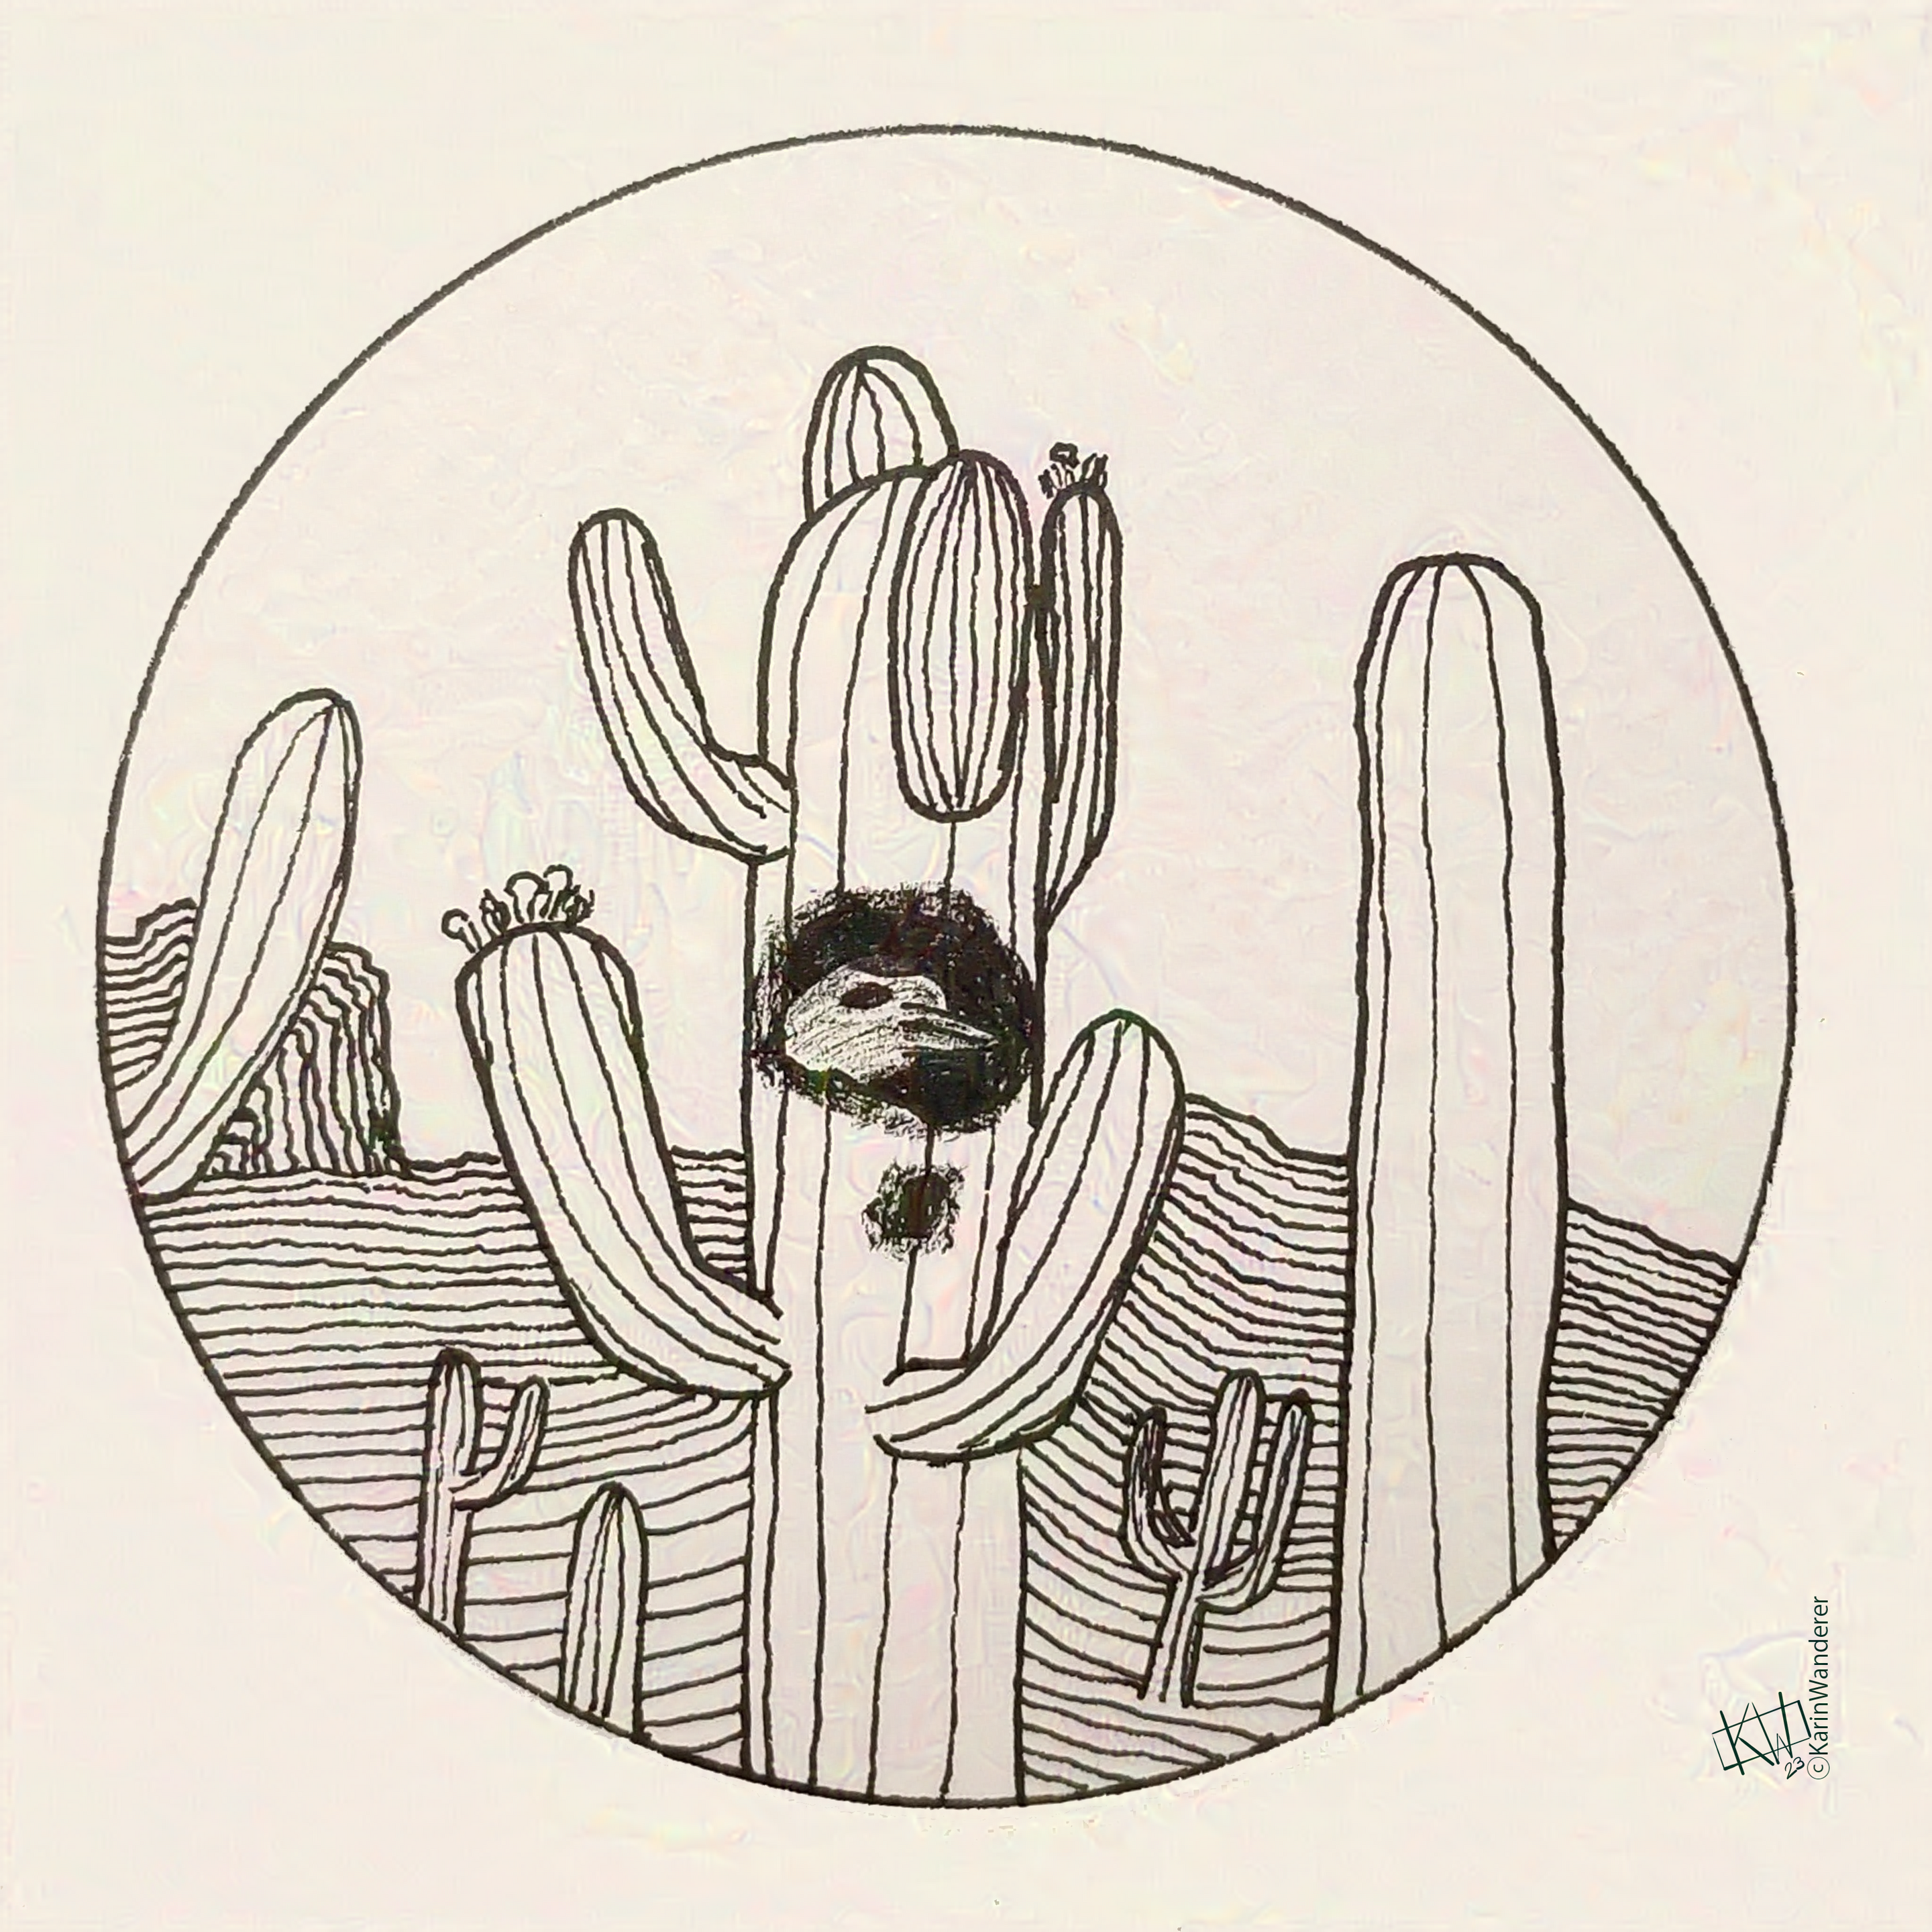 Line art of a cactus wren resting in a hole in a saguaro cactus.